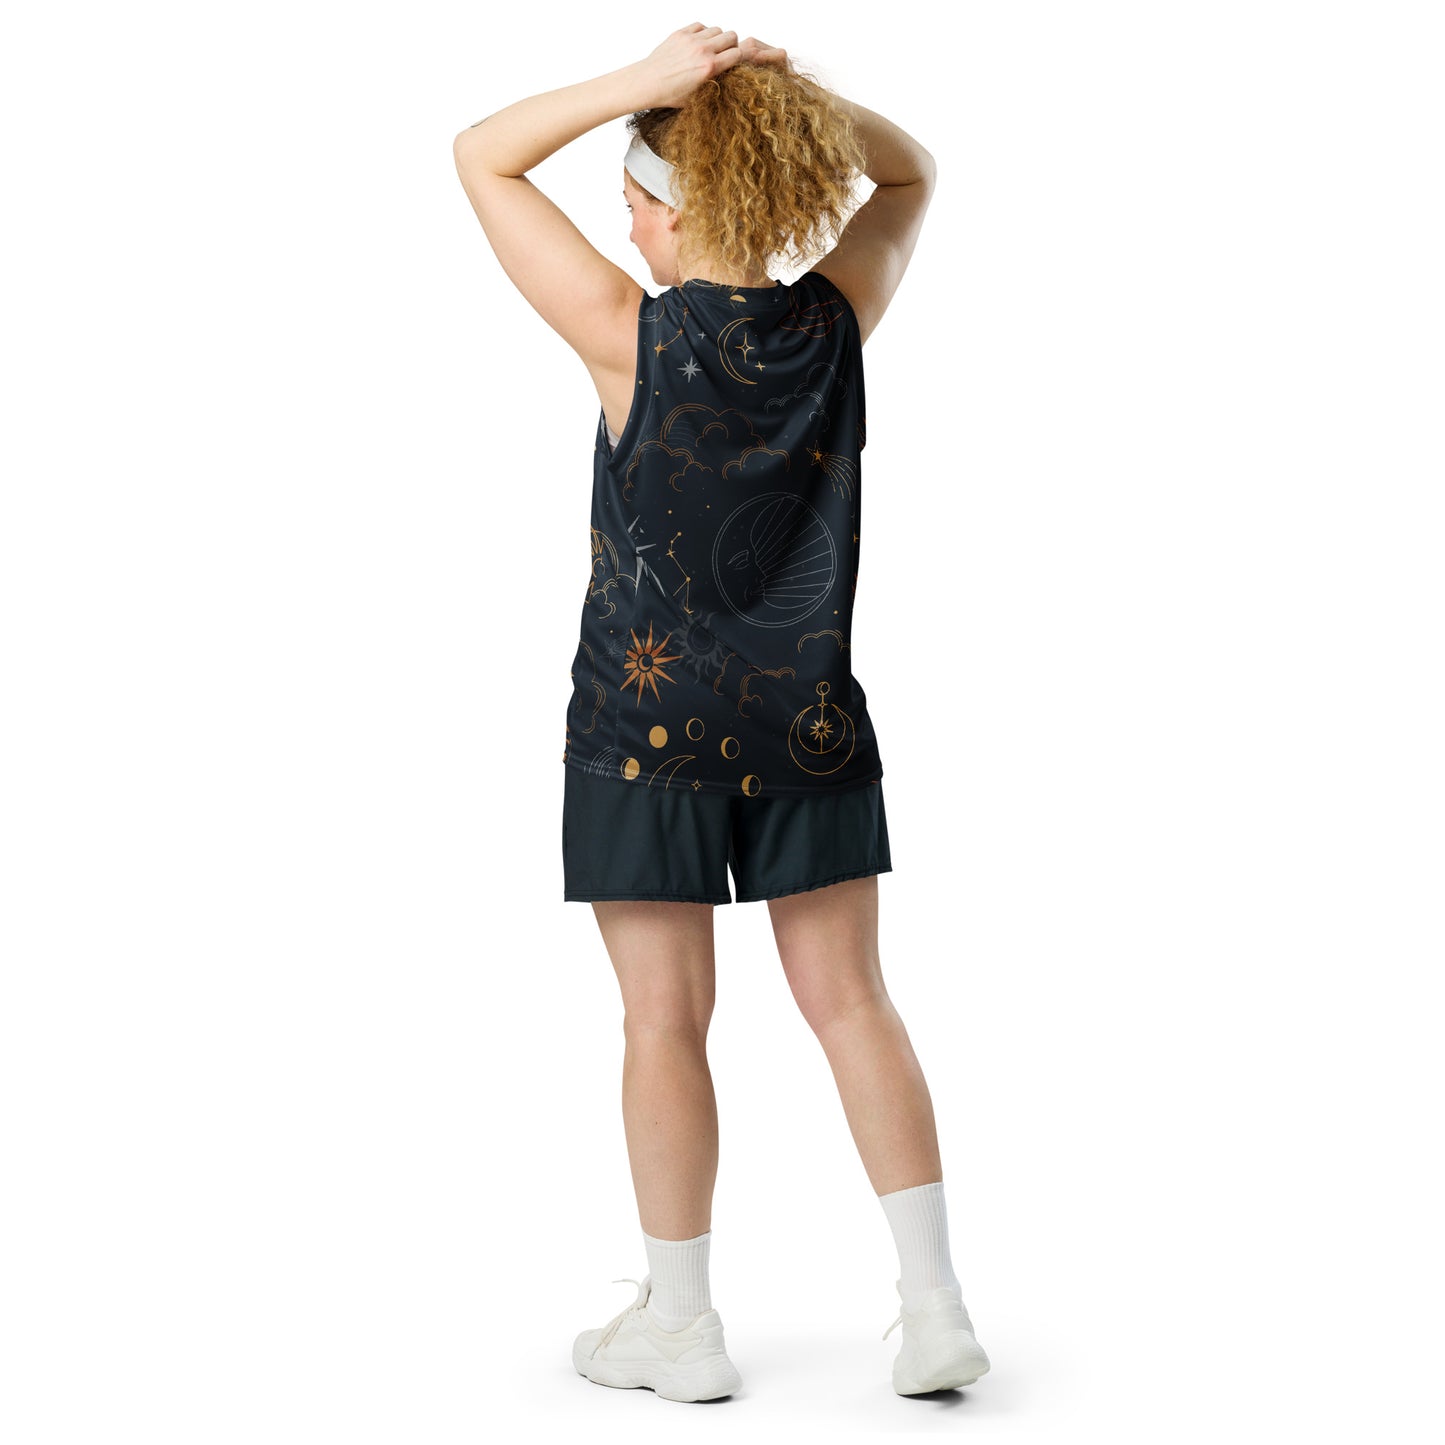 Stars and Planets Recycled unisex basketball jersey